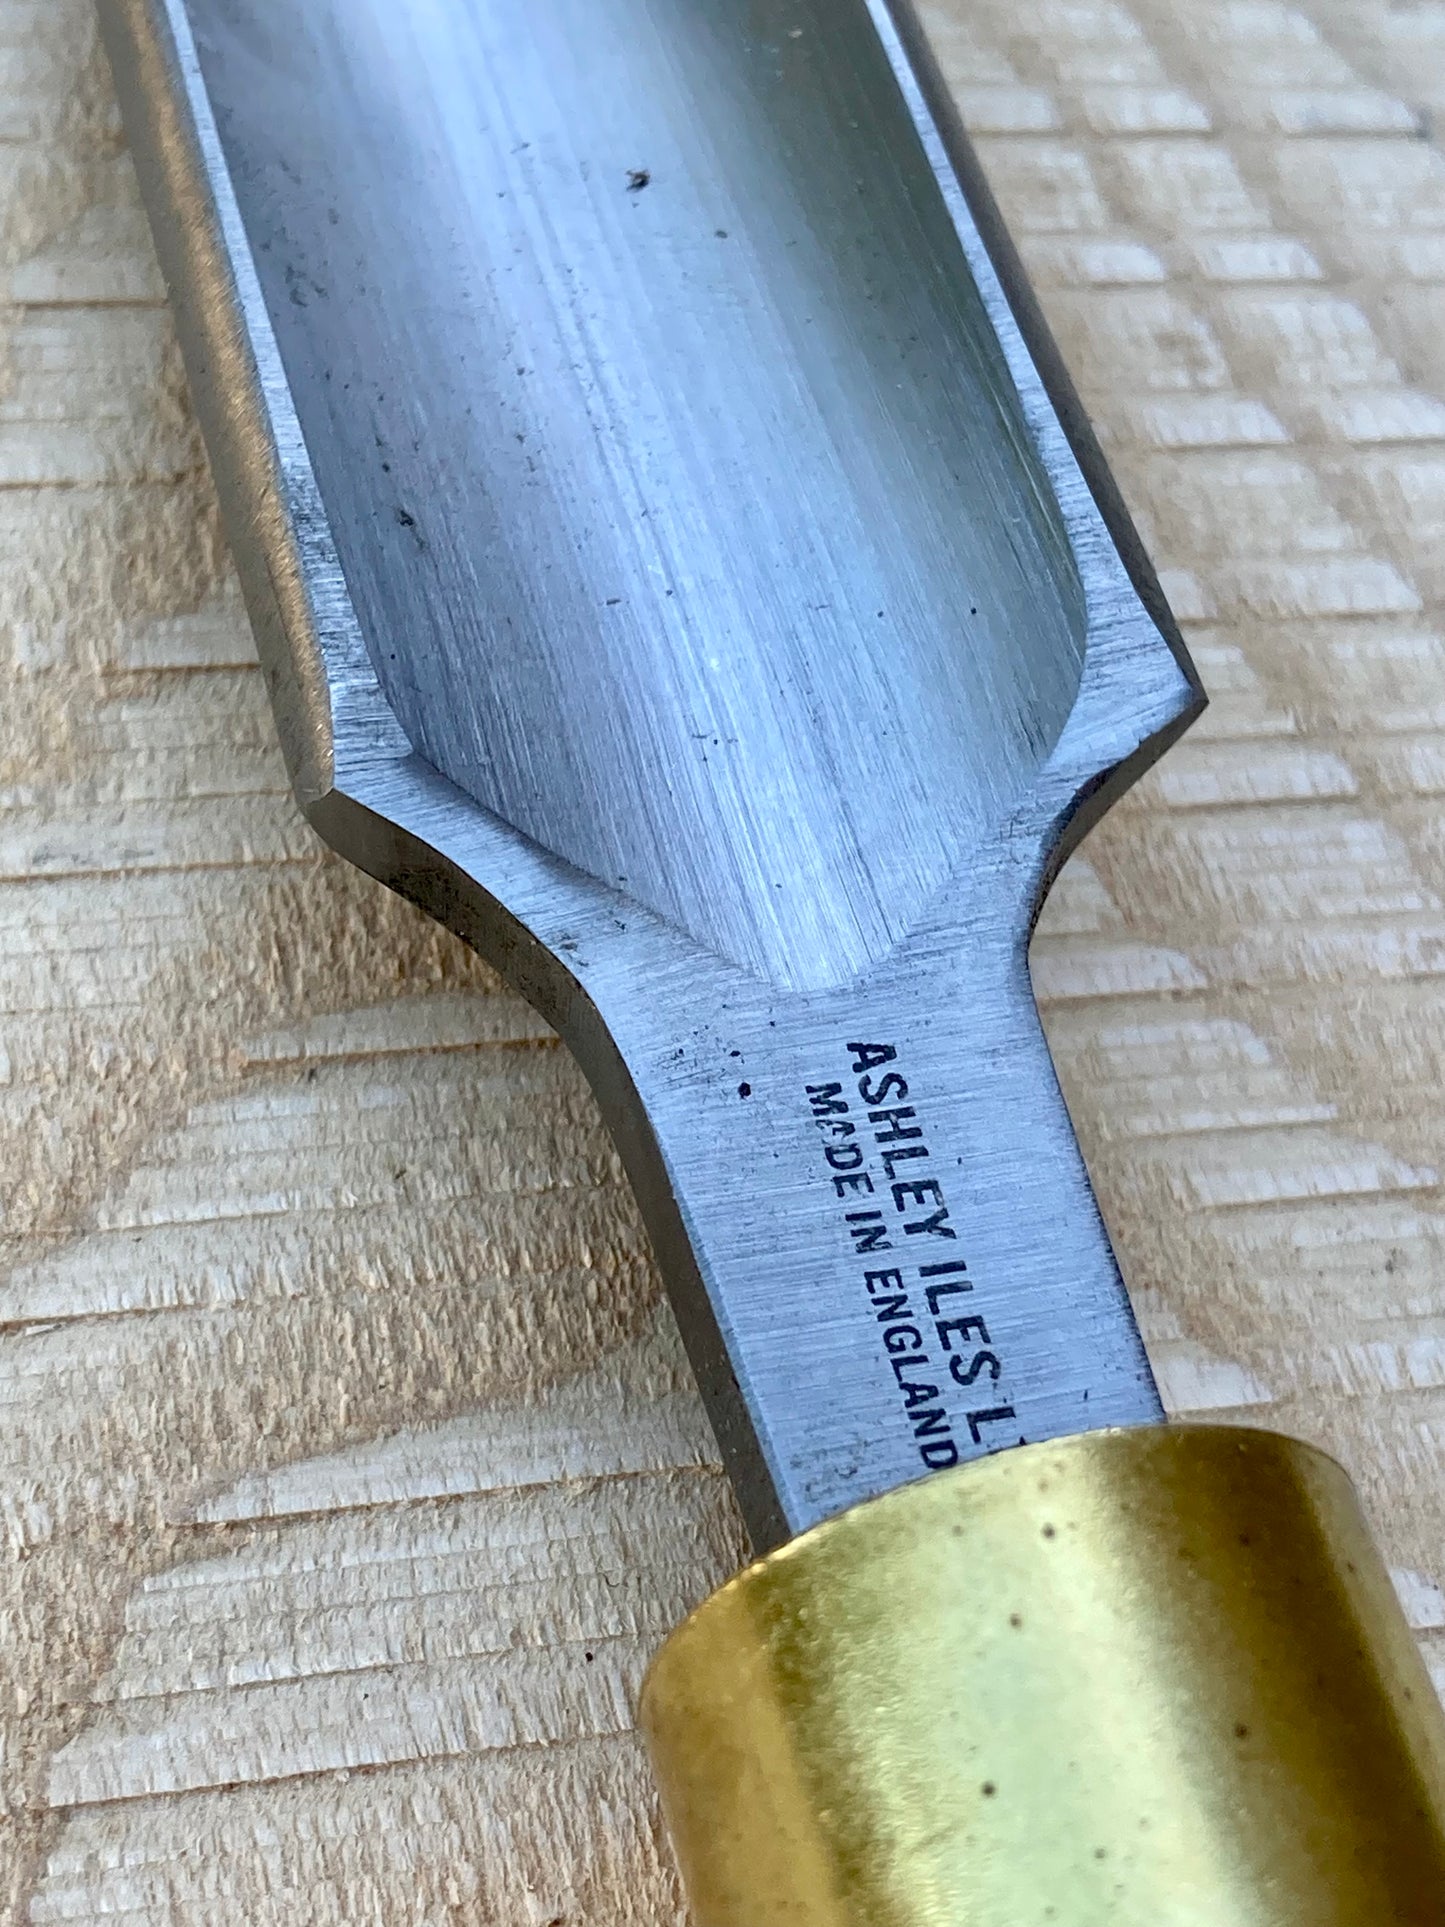 Ashley Iles - 1 1/4" Roughing Out Gouge, #7 curvature